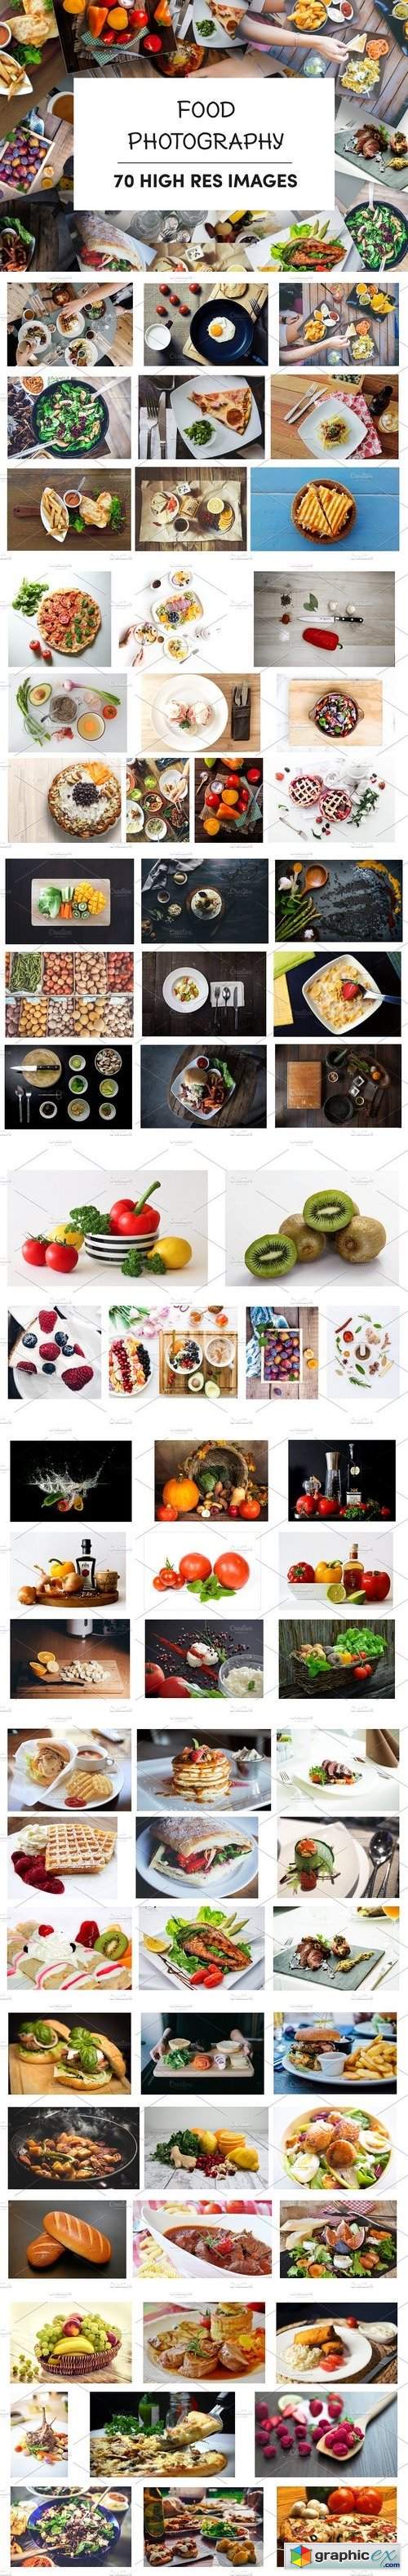 70 High Res Food Photography Images